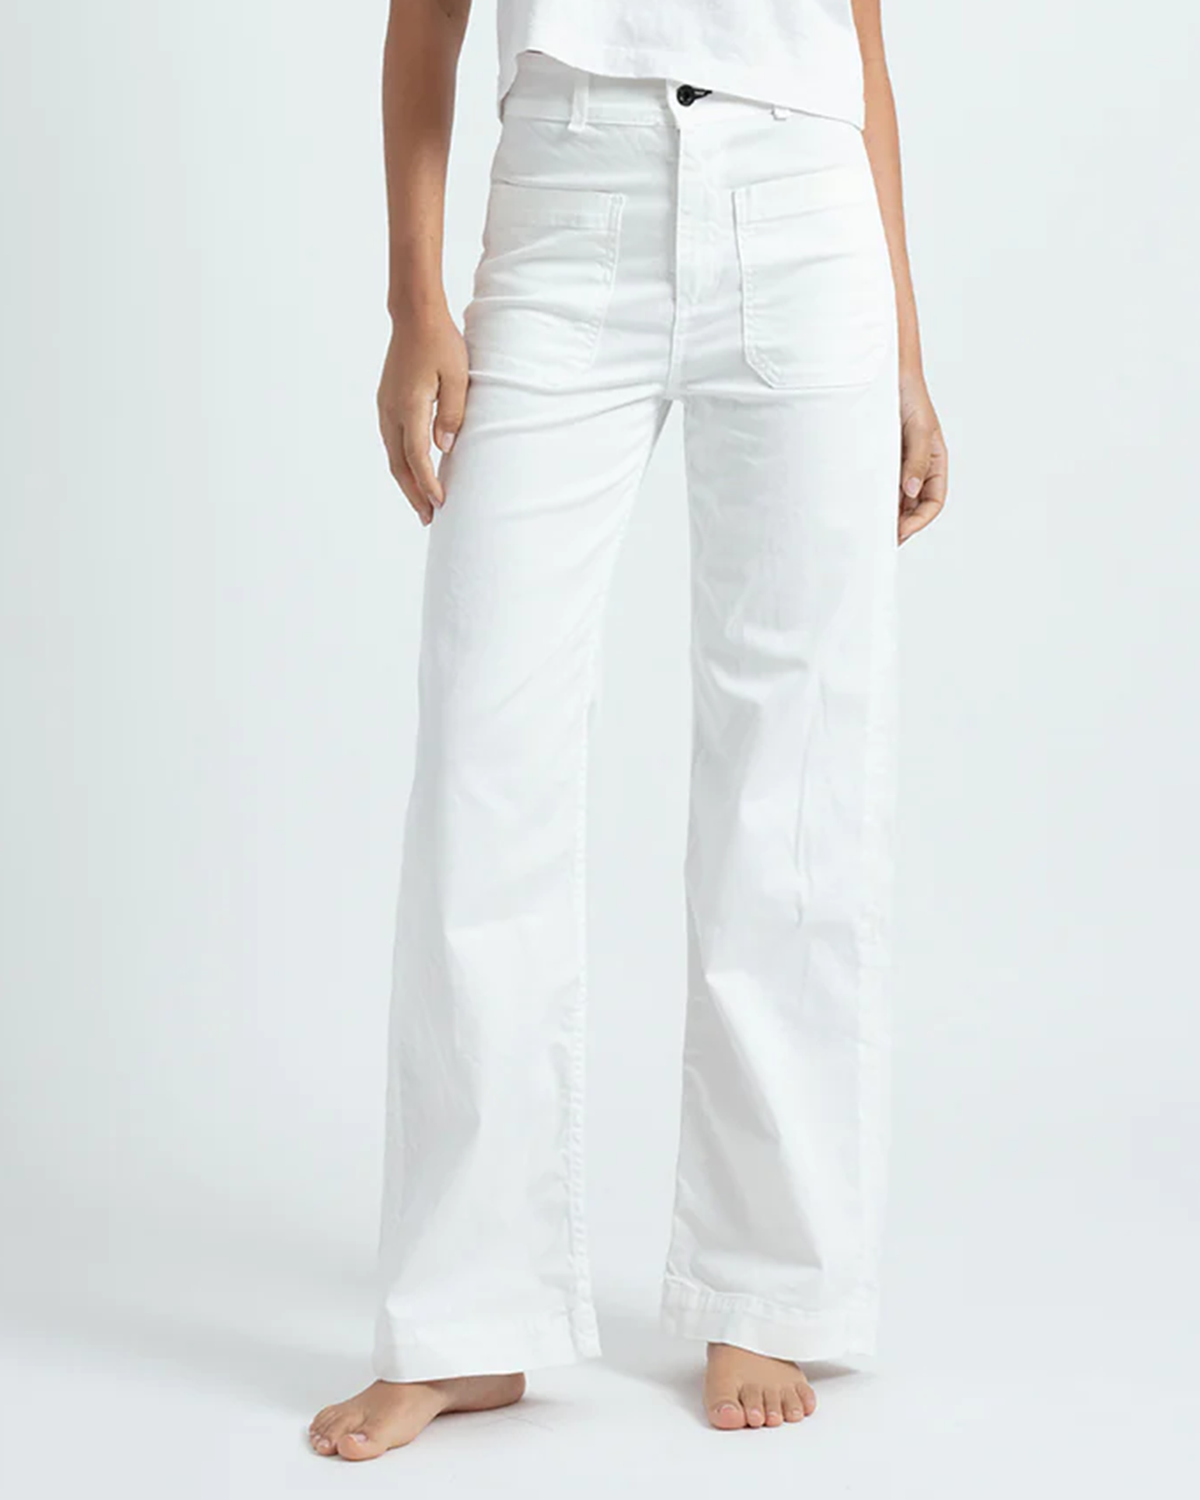 Sailor Pant - Twill in Ivory